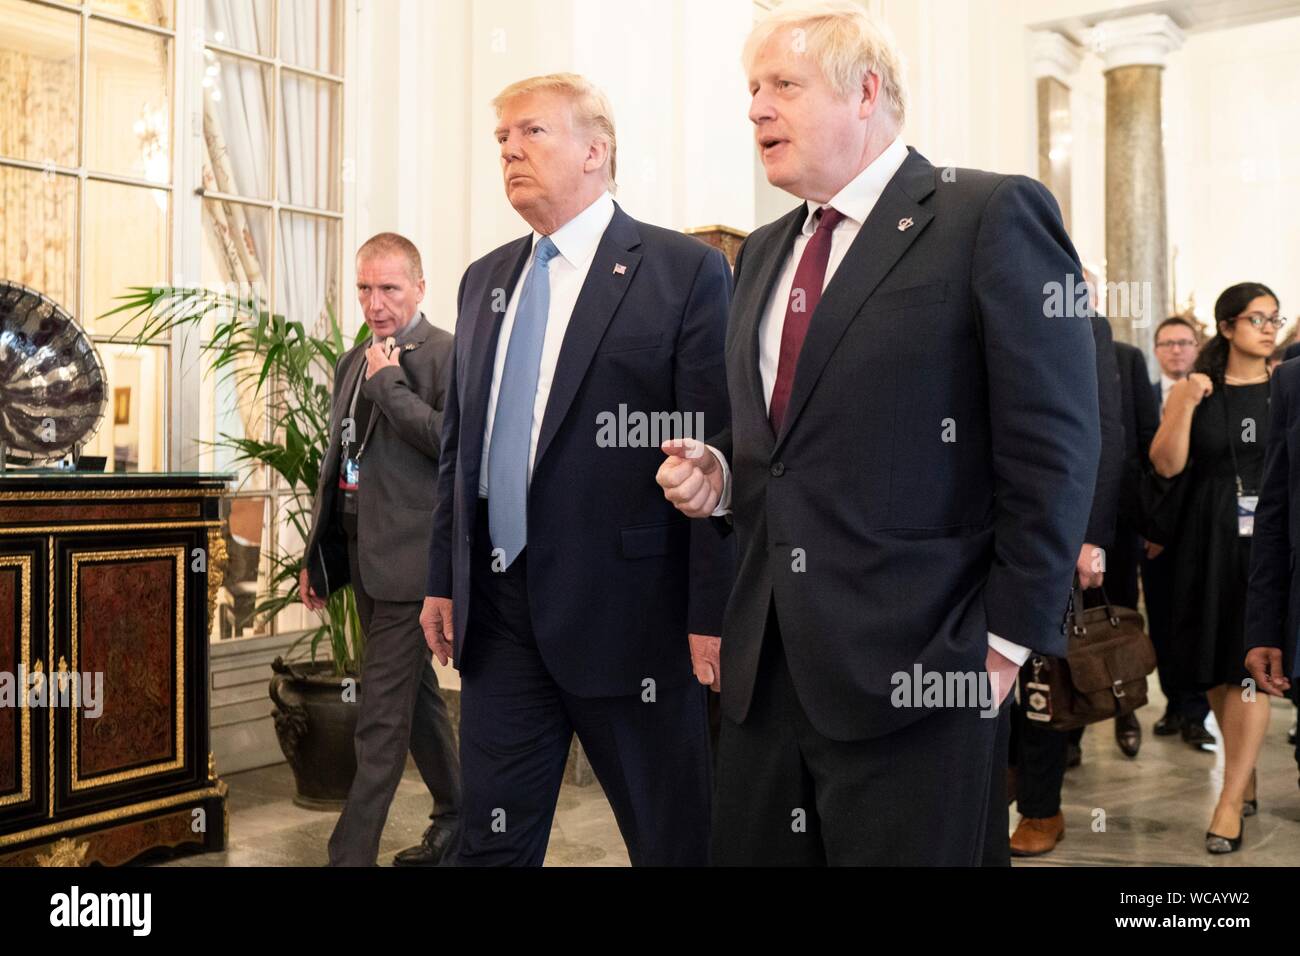 U.S. President Donald Trump, left, walks with British Prime Minister Boris Johnson following their meeting on the sidelines of the G7 Summit at the Hotel du Palais Biarritz August 25, 2019 in Biarritz, France. Stock Photo